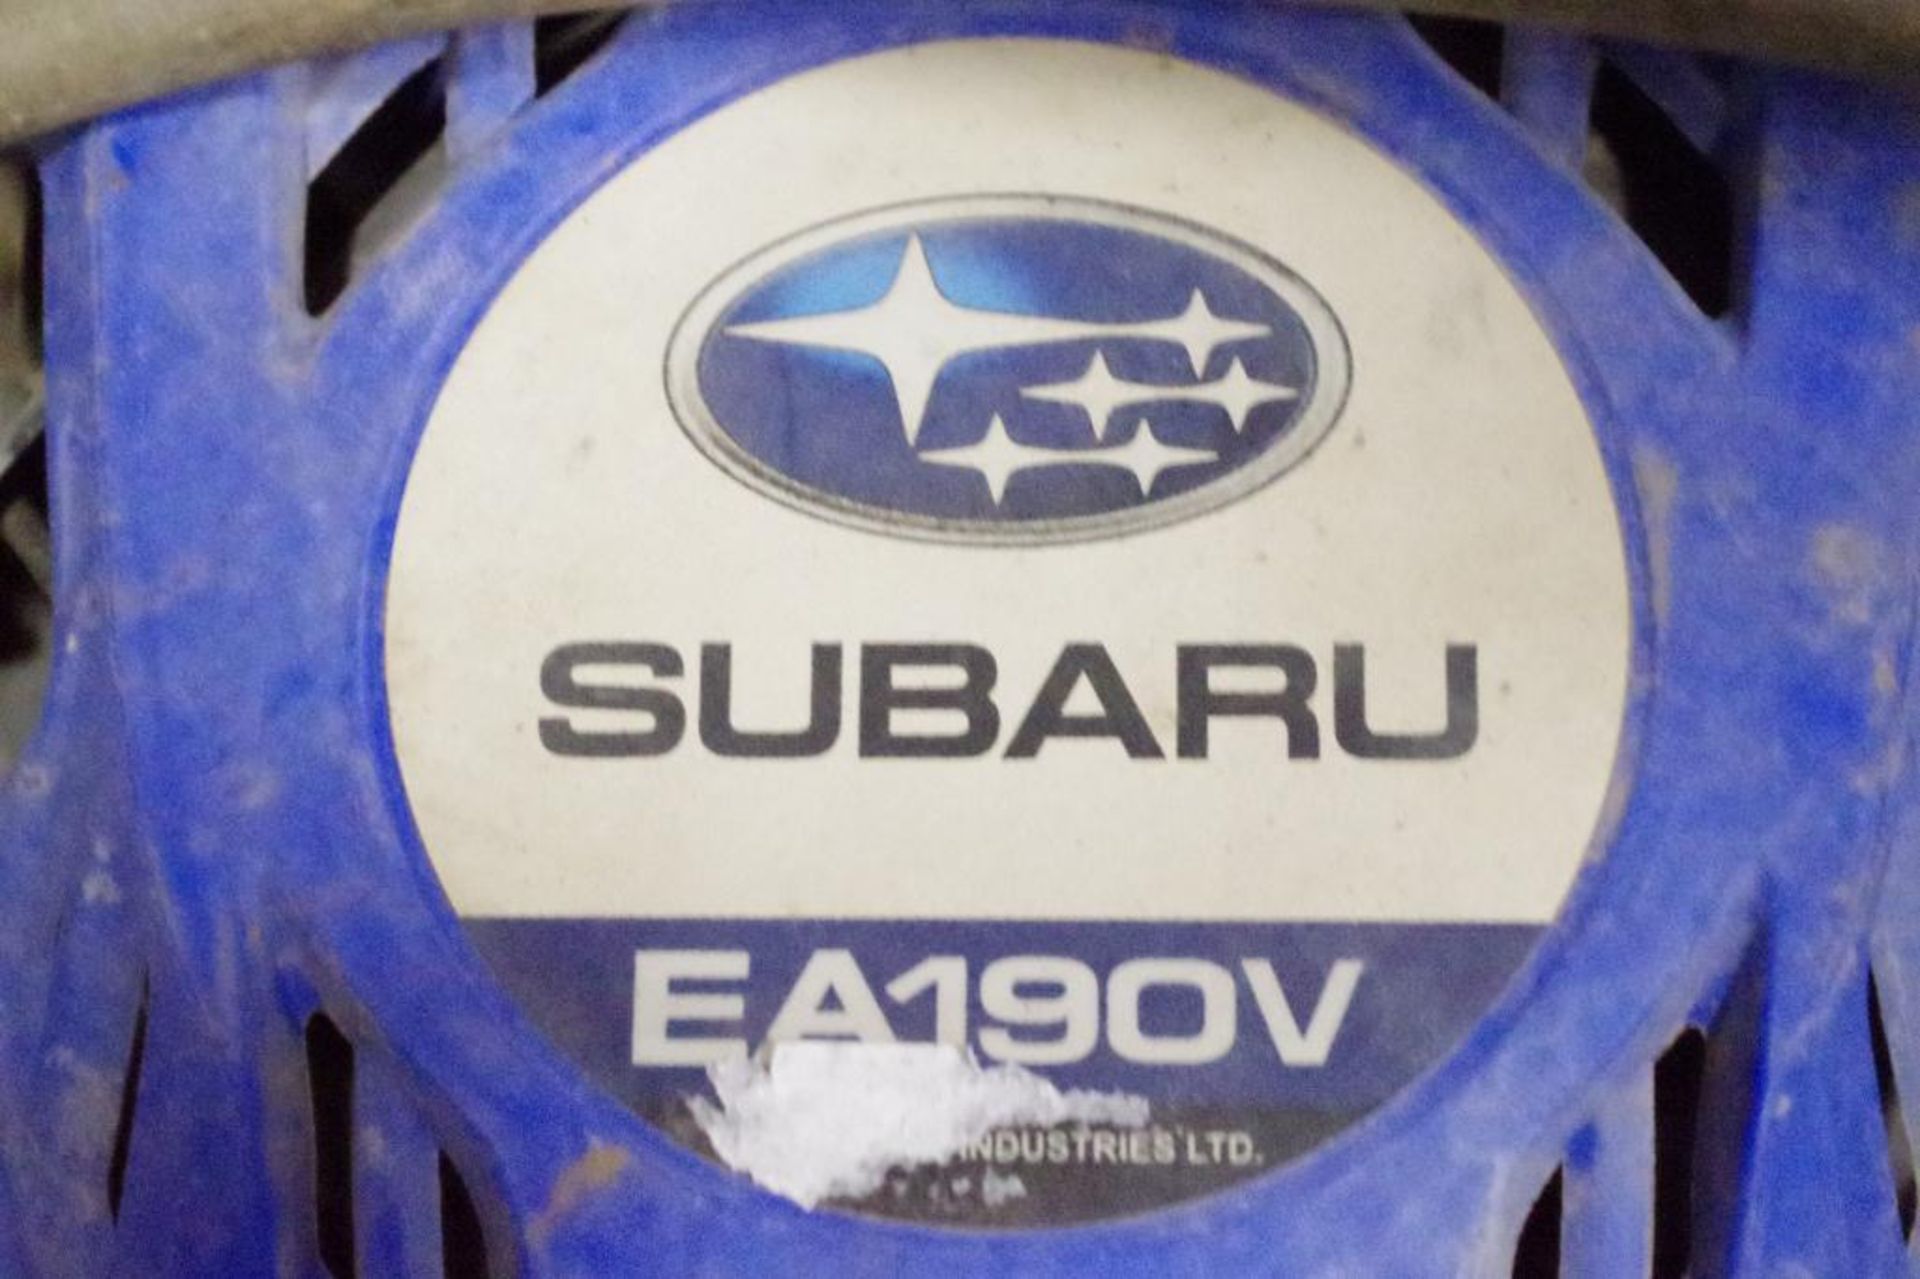 SUBARU 3100 PSI 2.4GPM Electric Start Pressure Washer (Does NOT Start) - Image 2 of 4